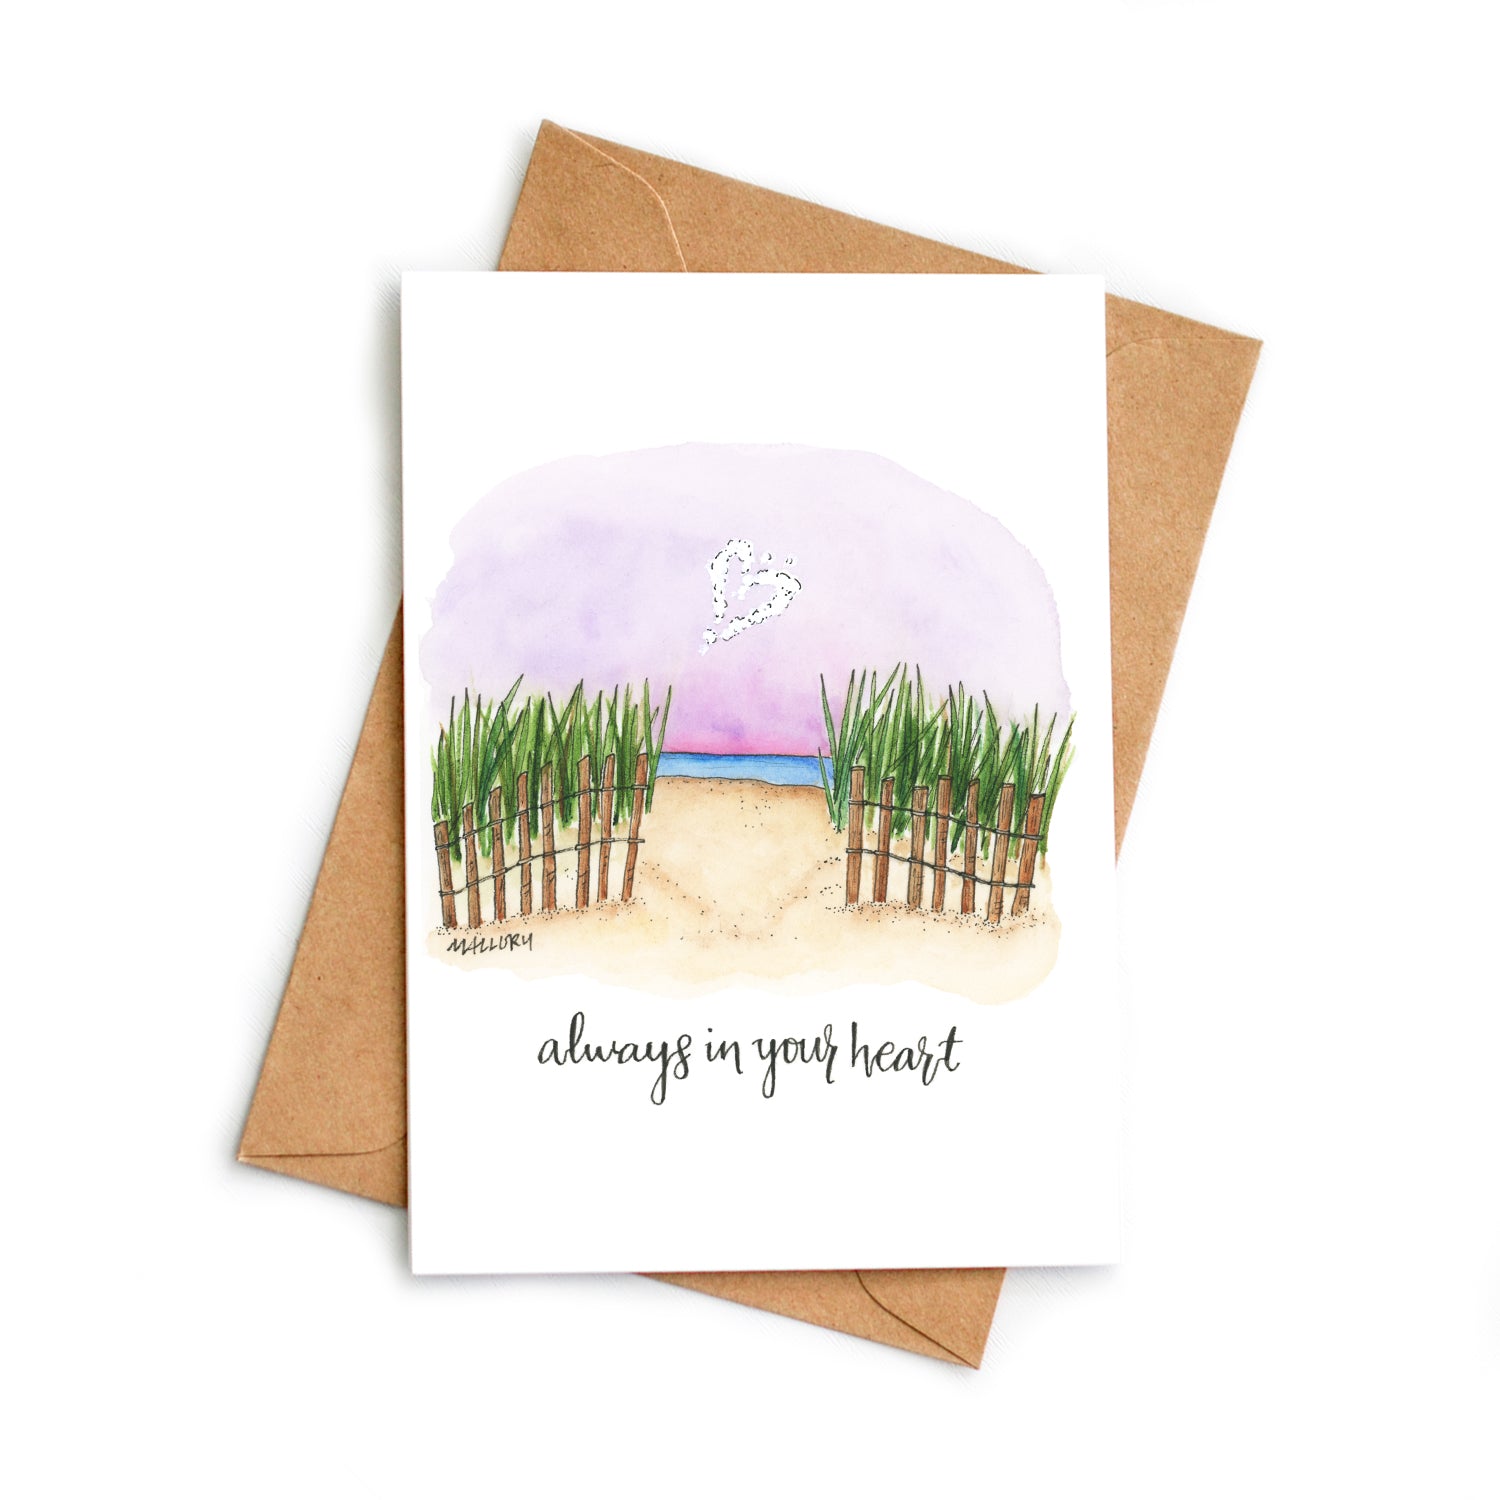 Sympathy card with grassy dunes and the setting sun in a purple sky with the blue ocean below. A cloud in the shape of a heart is above with the words, "always in your heart" hand-lettered on the sympathy card.